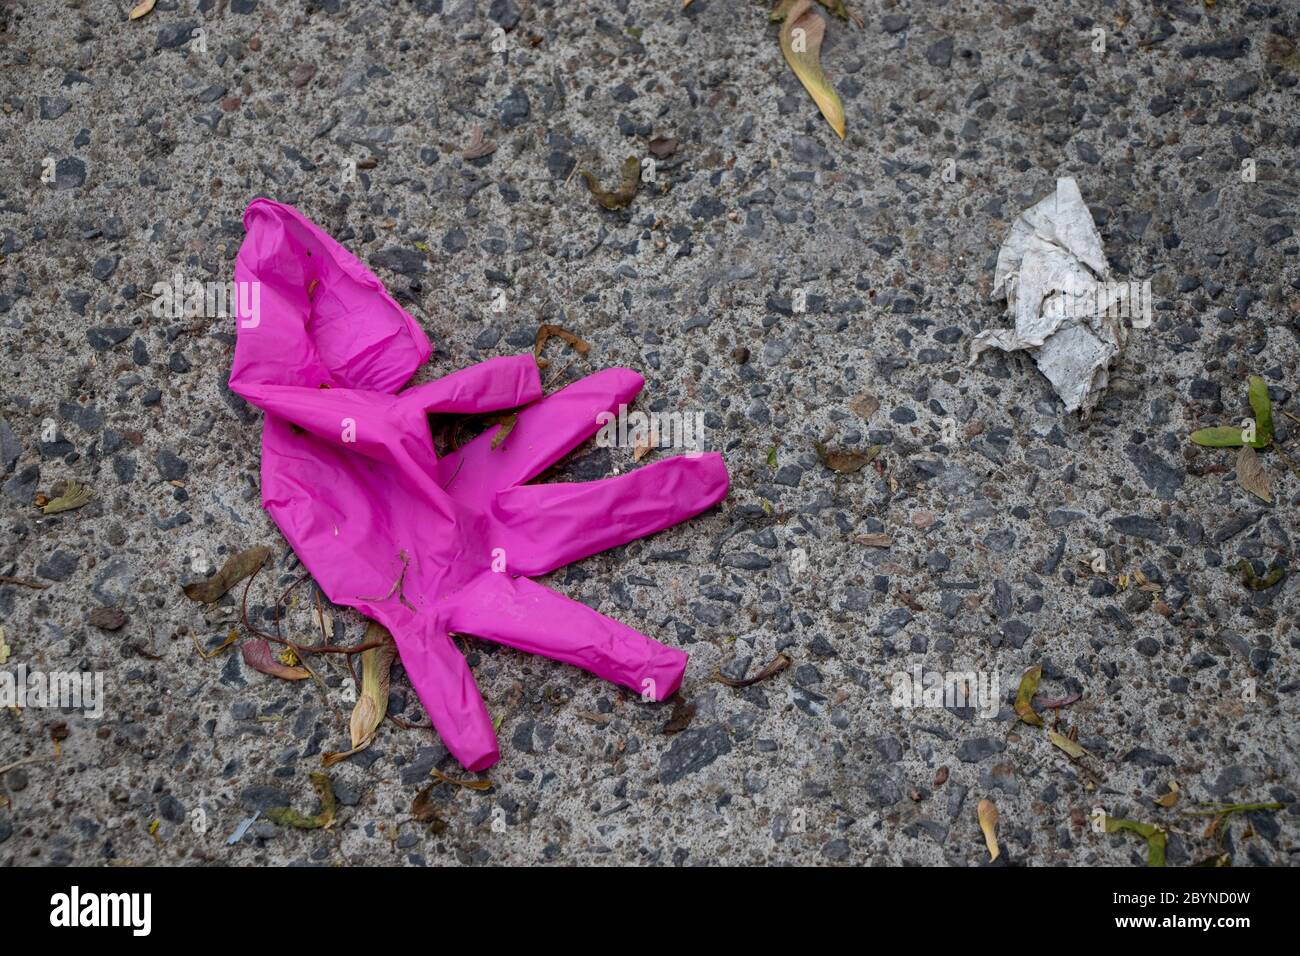 Used medical pink glove on the ground during Coronavirus COVID-19 Pandemic, close up view from above Stock Photo